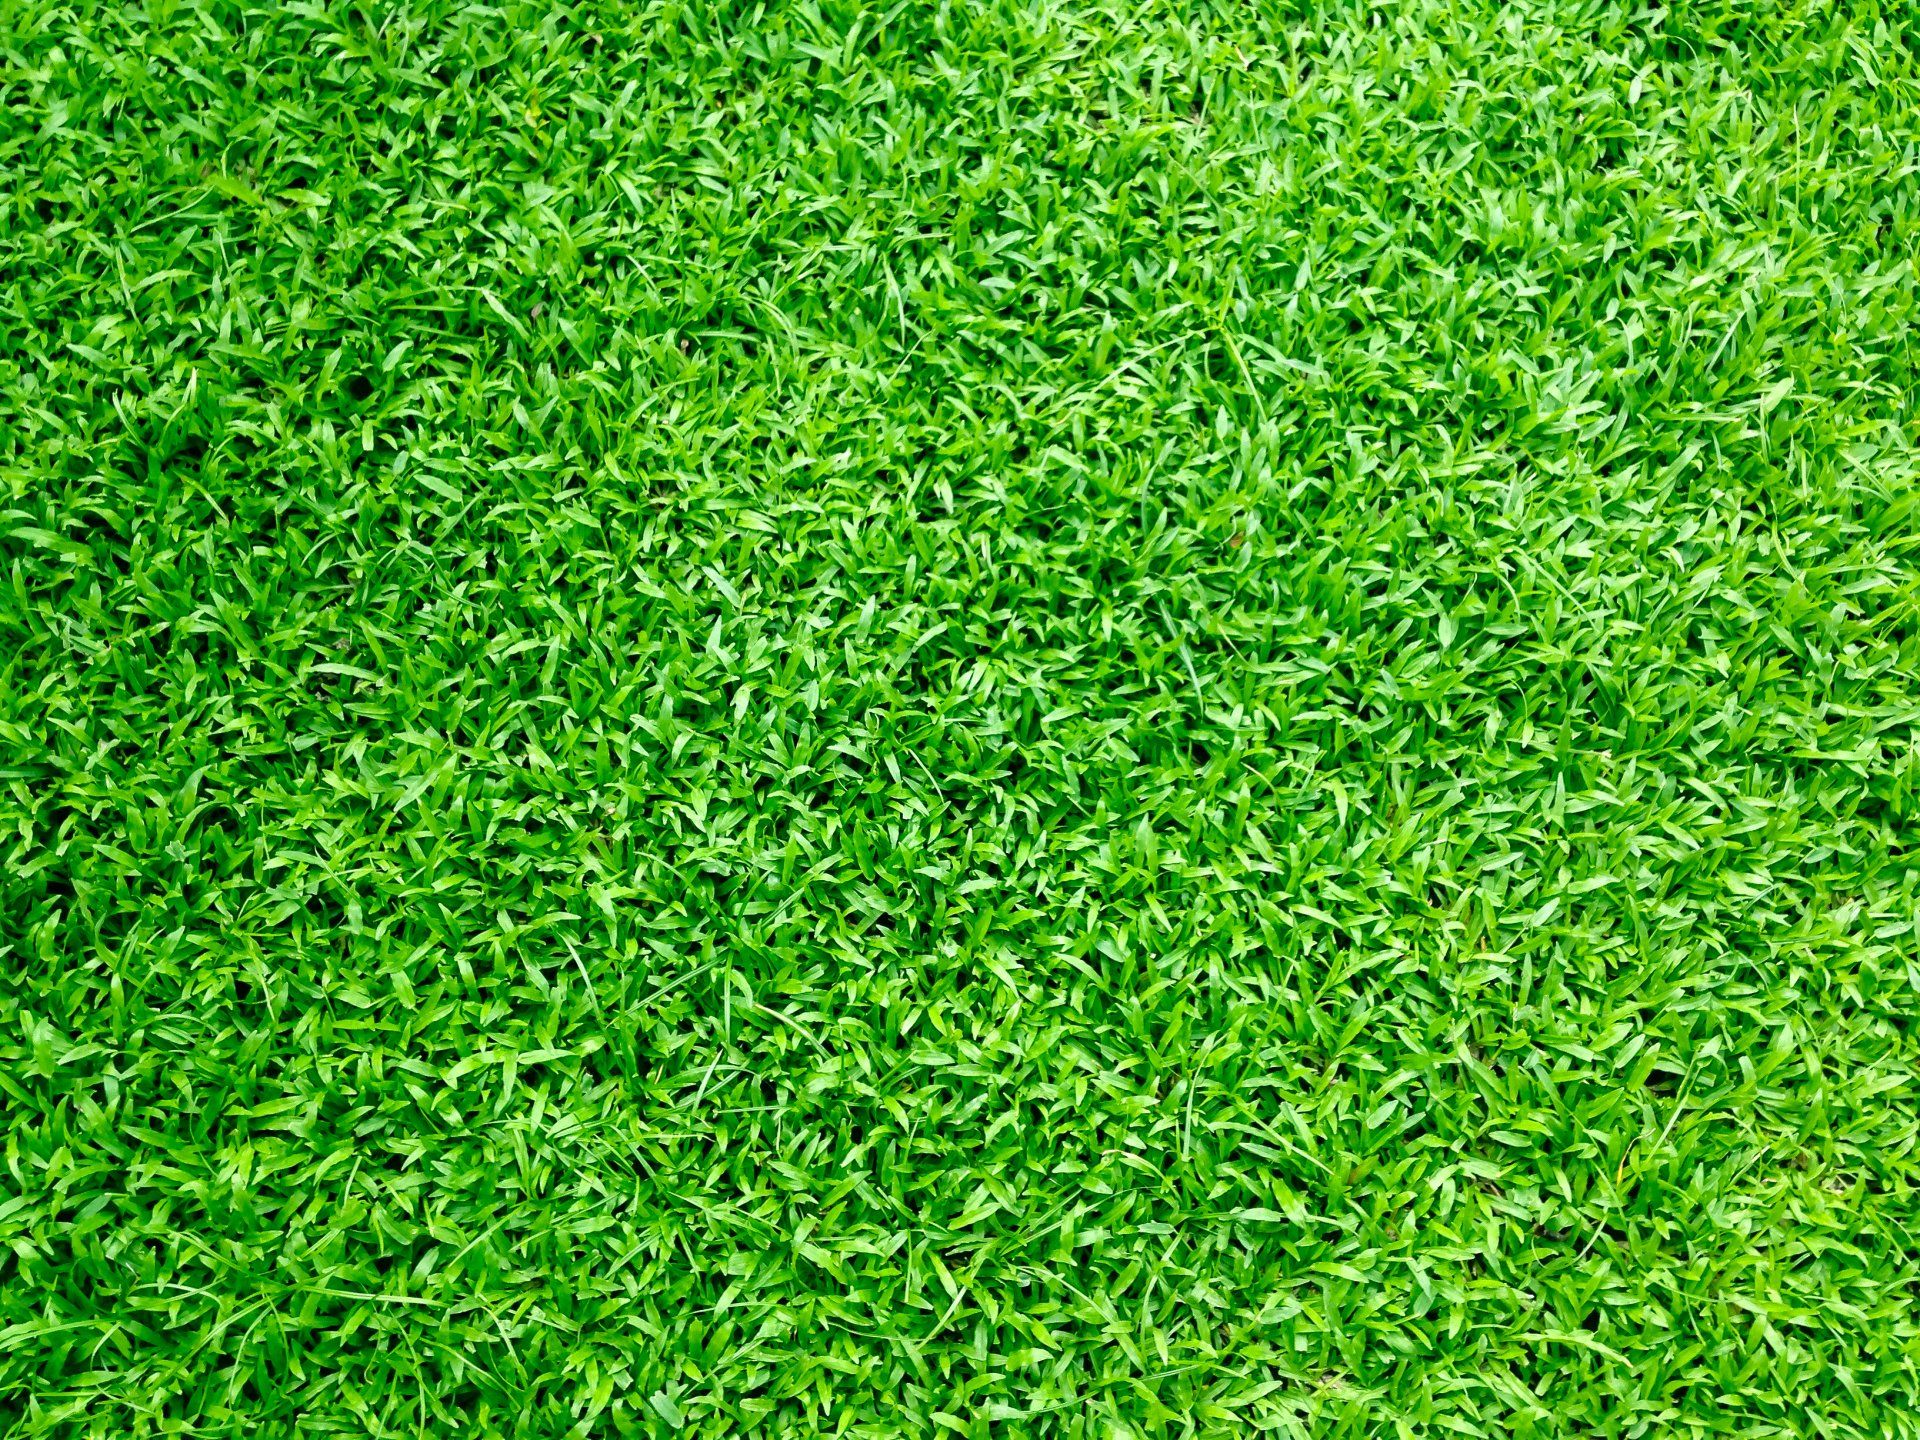 When you are researching turf grass installation, feel free to contact our team at Suncoast Sod Farm